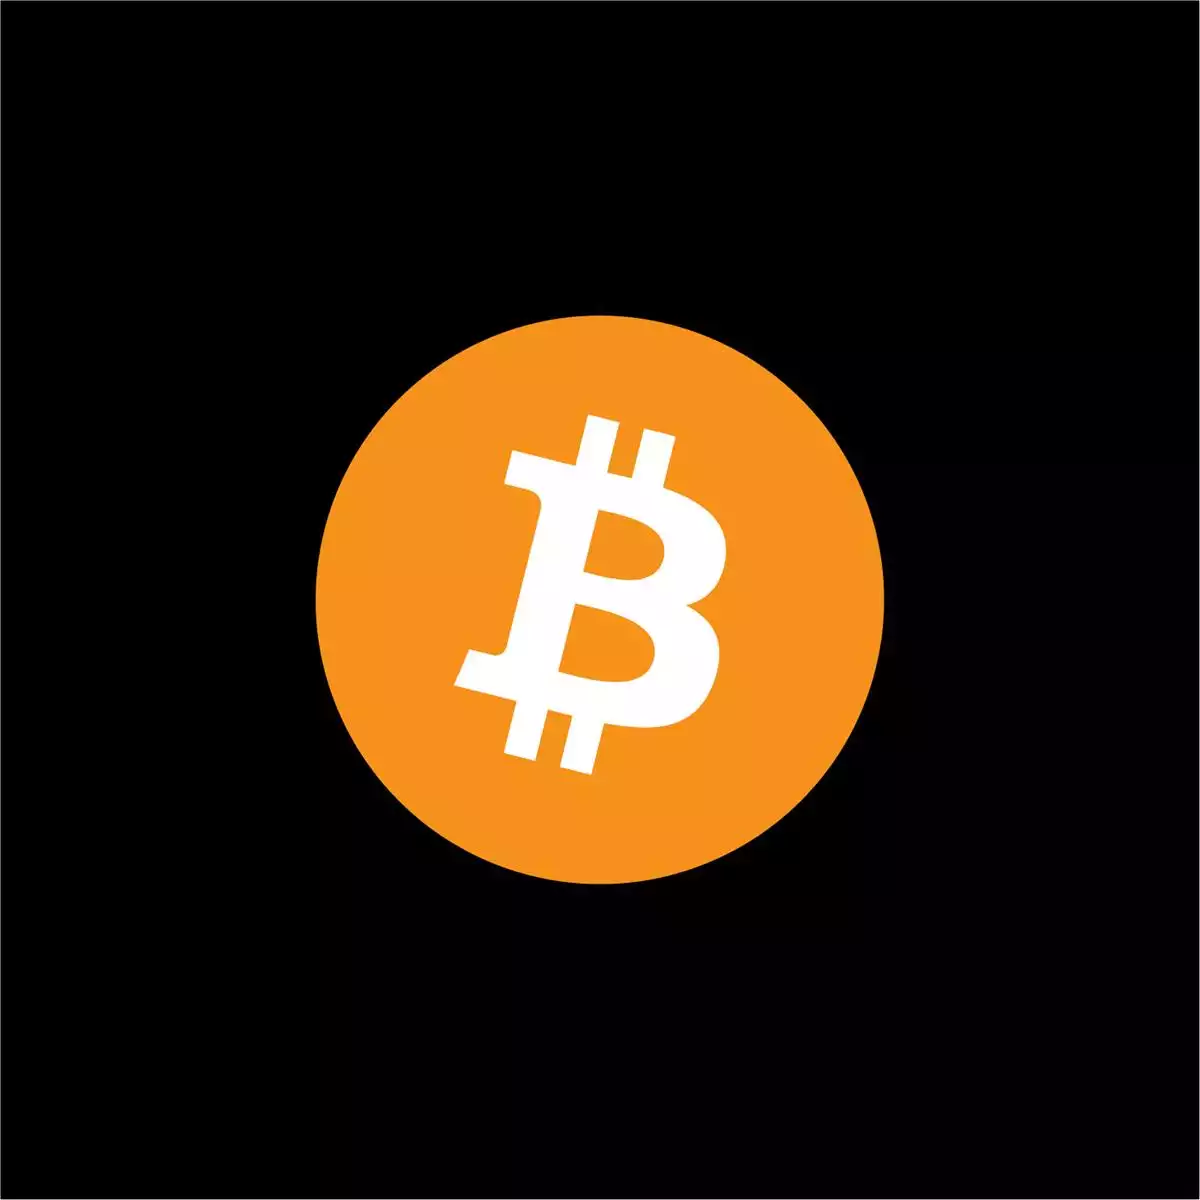 ainslie bitcoin (btc)bitcoin (btc) is often referred to as the “king of crypto”, being the first and currently the most valuable coin in terms of mark...